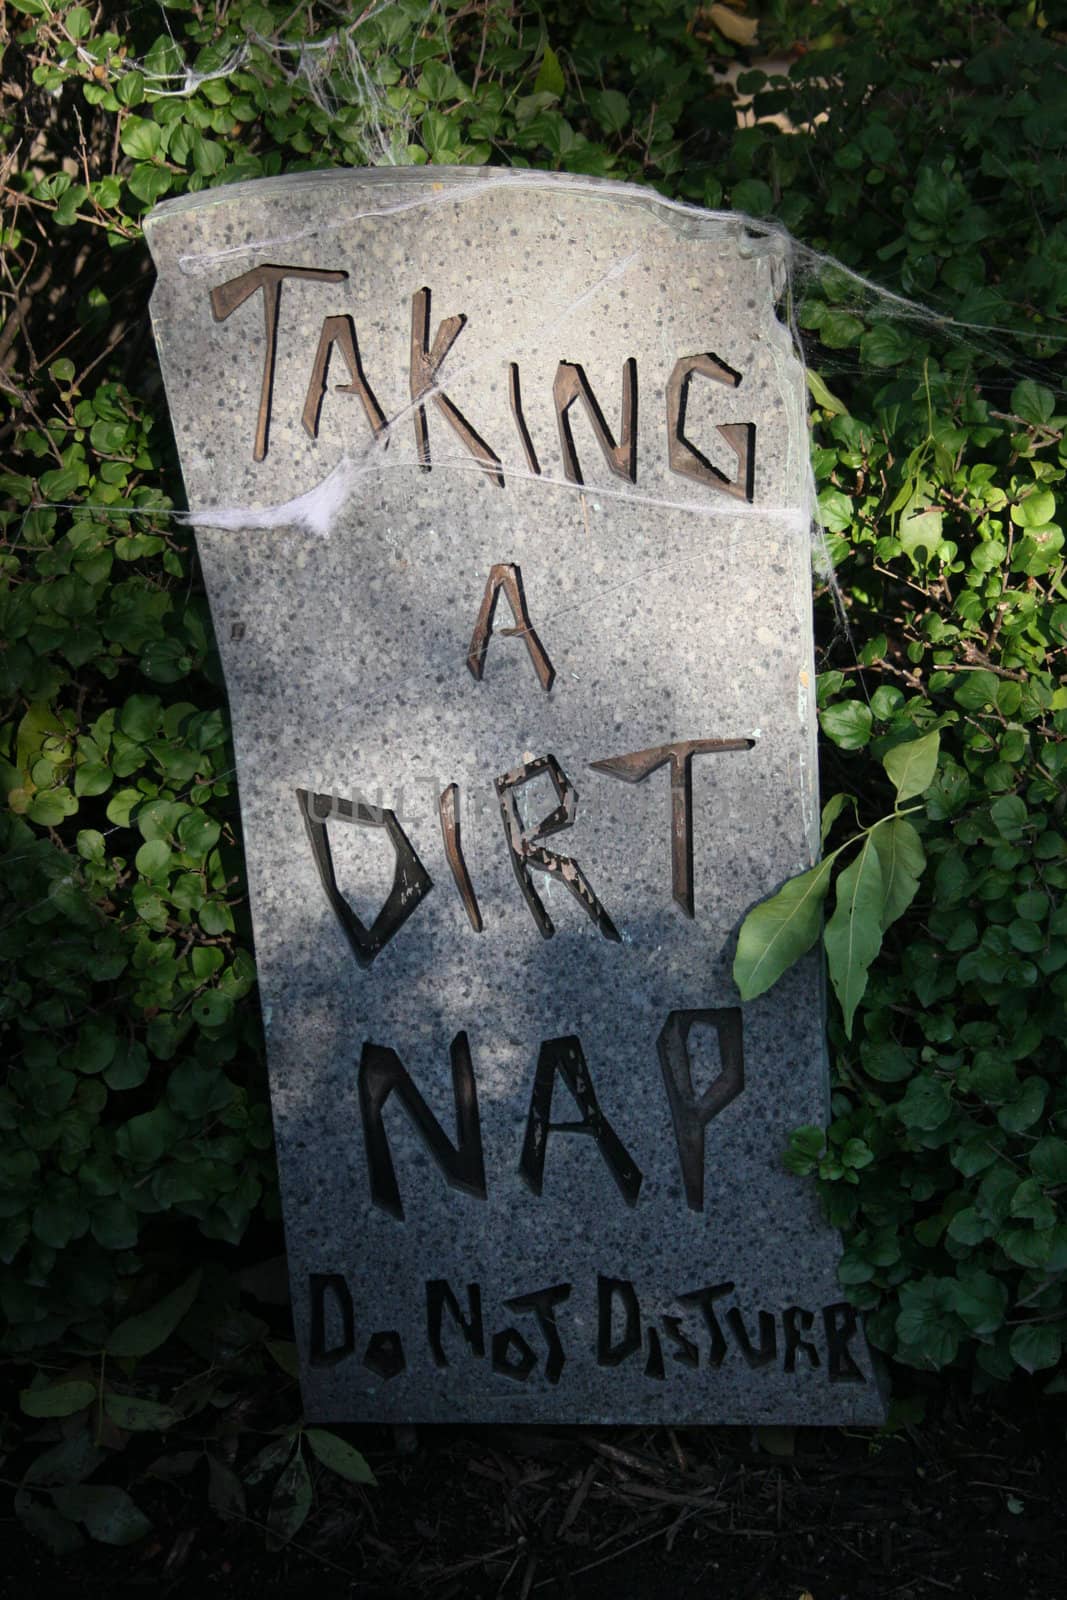 Tombstone 'Taking a dirt nap' by Mbatelier